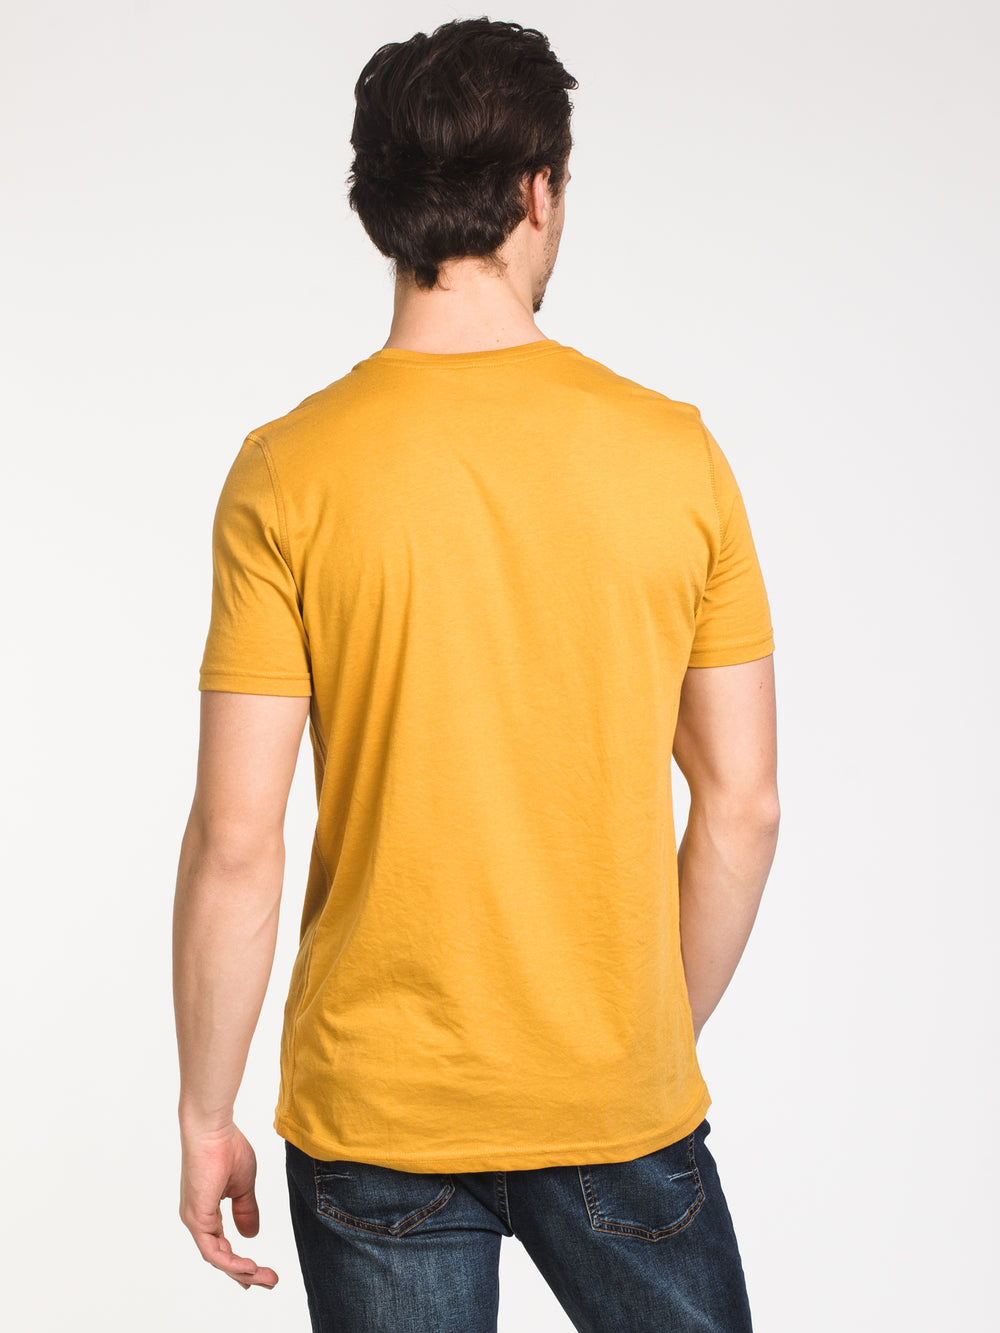 MENS VICTOR CREWNECK T - GOLD - CLEARANCE